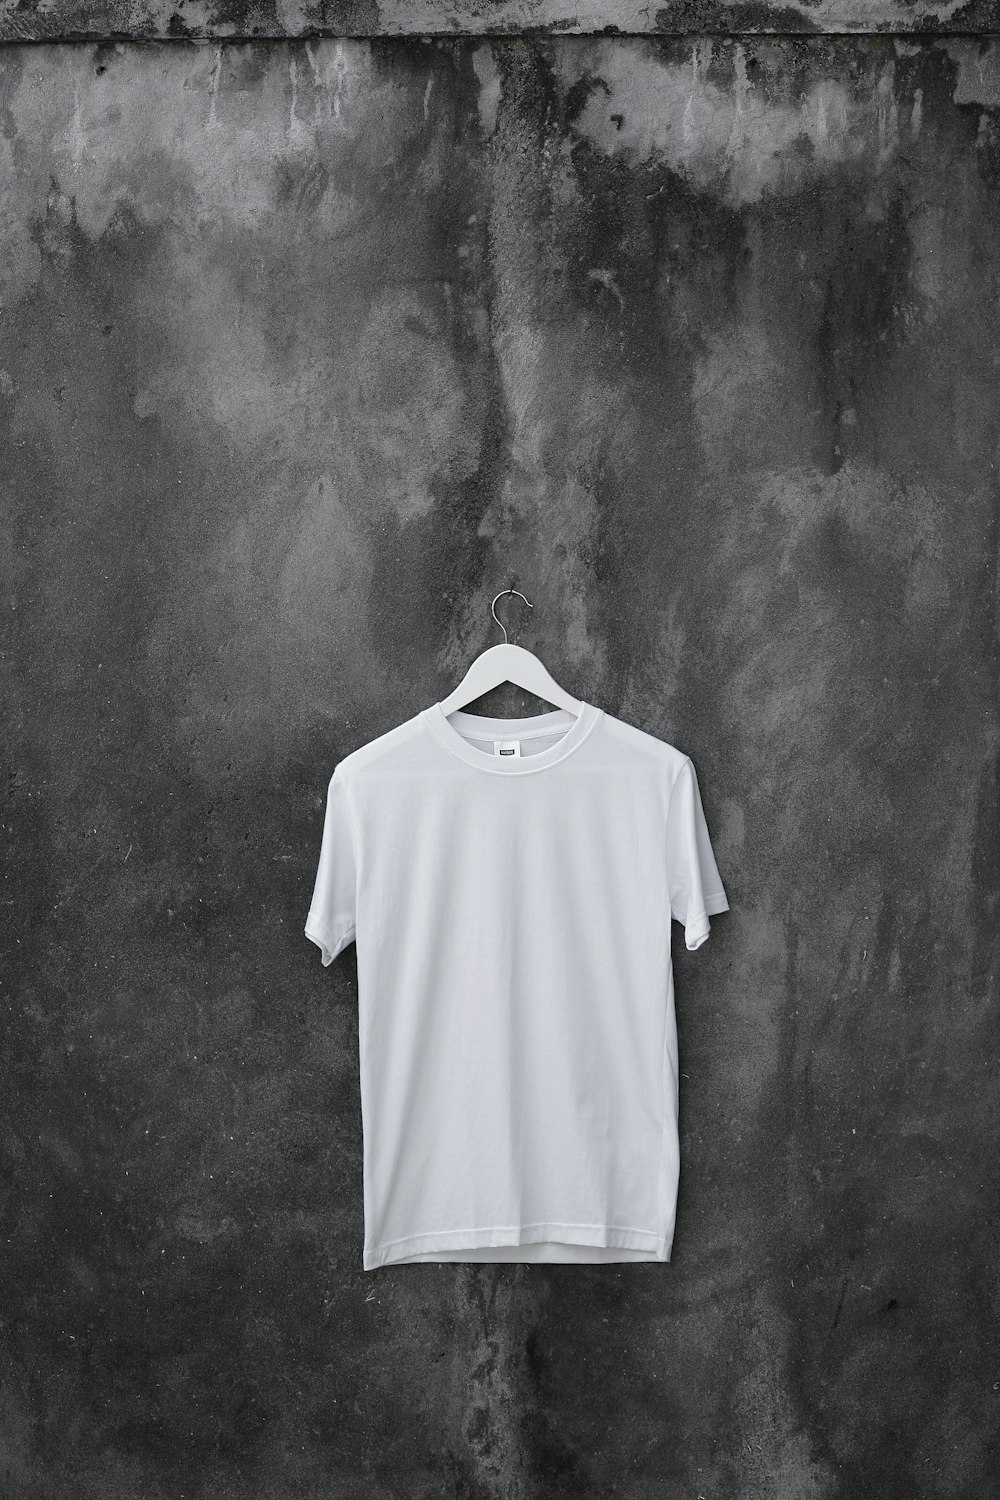 999+ White T Shirt Pictures | Download Free Images on Unsplash